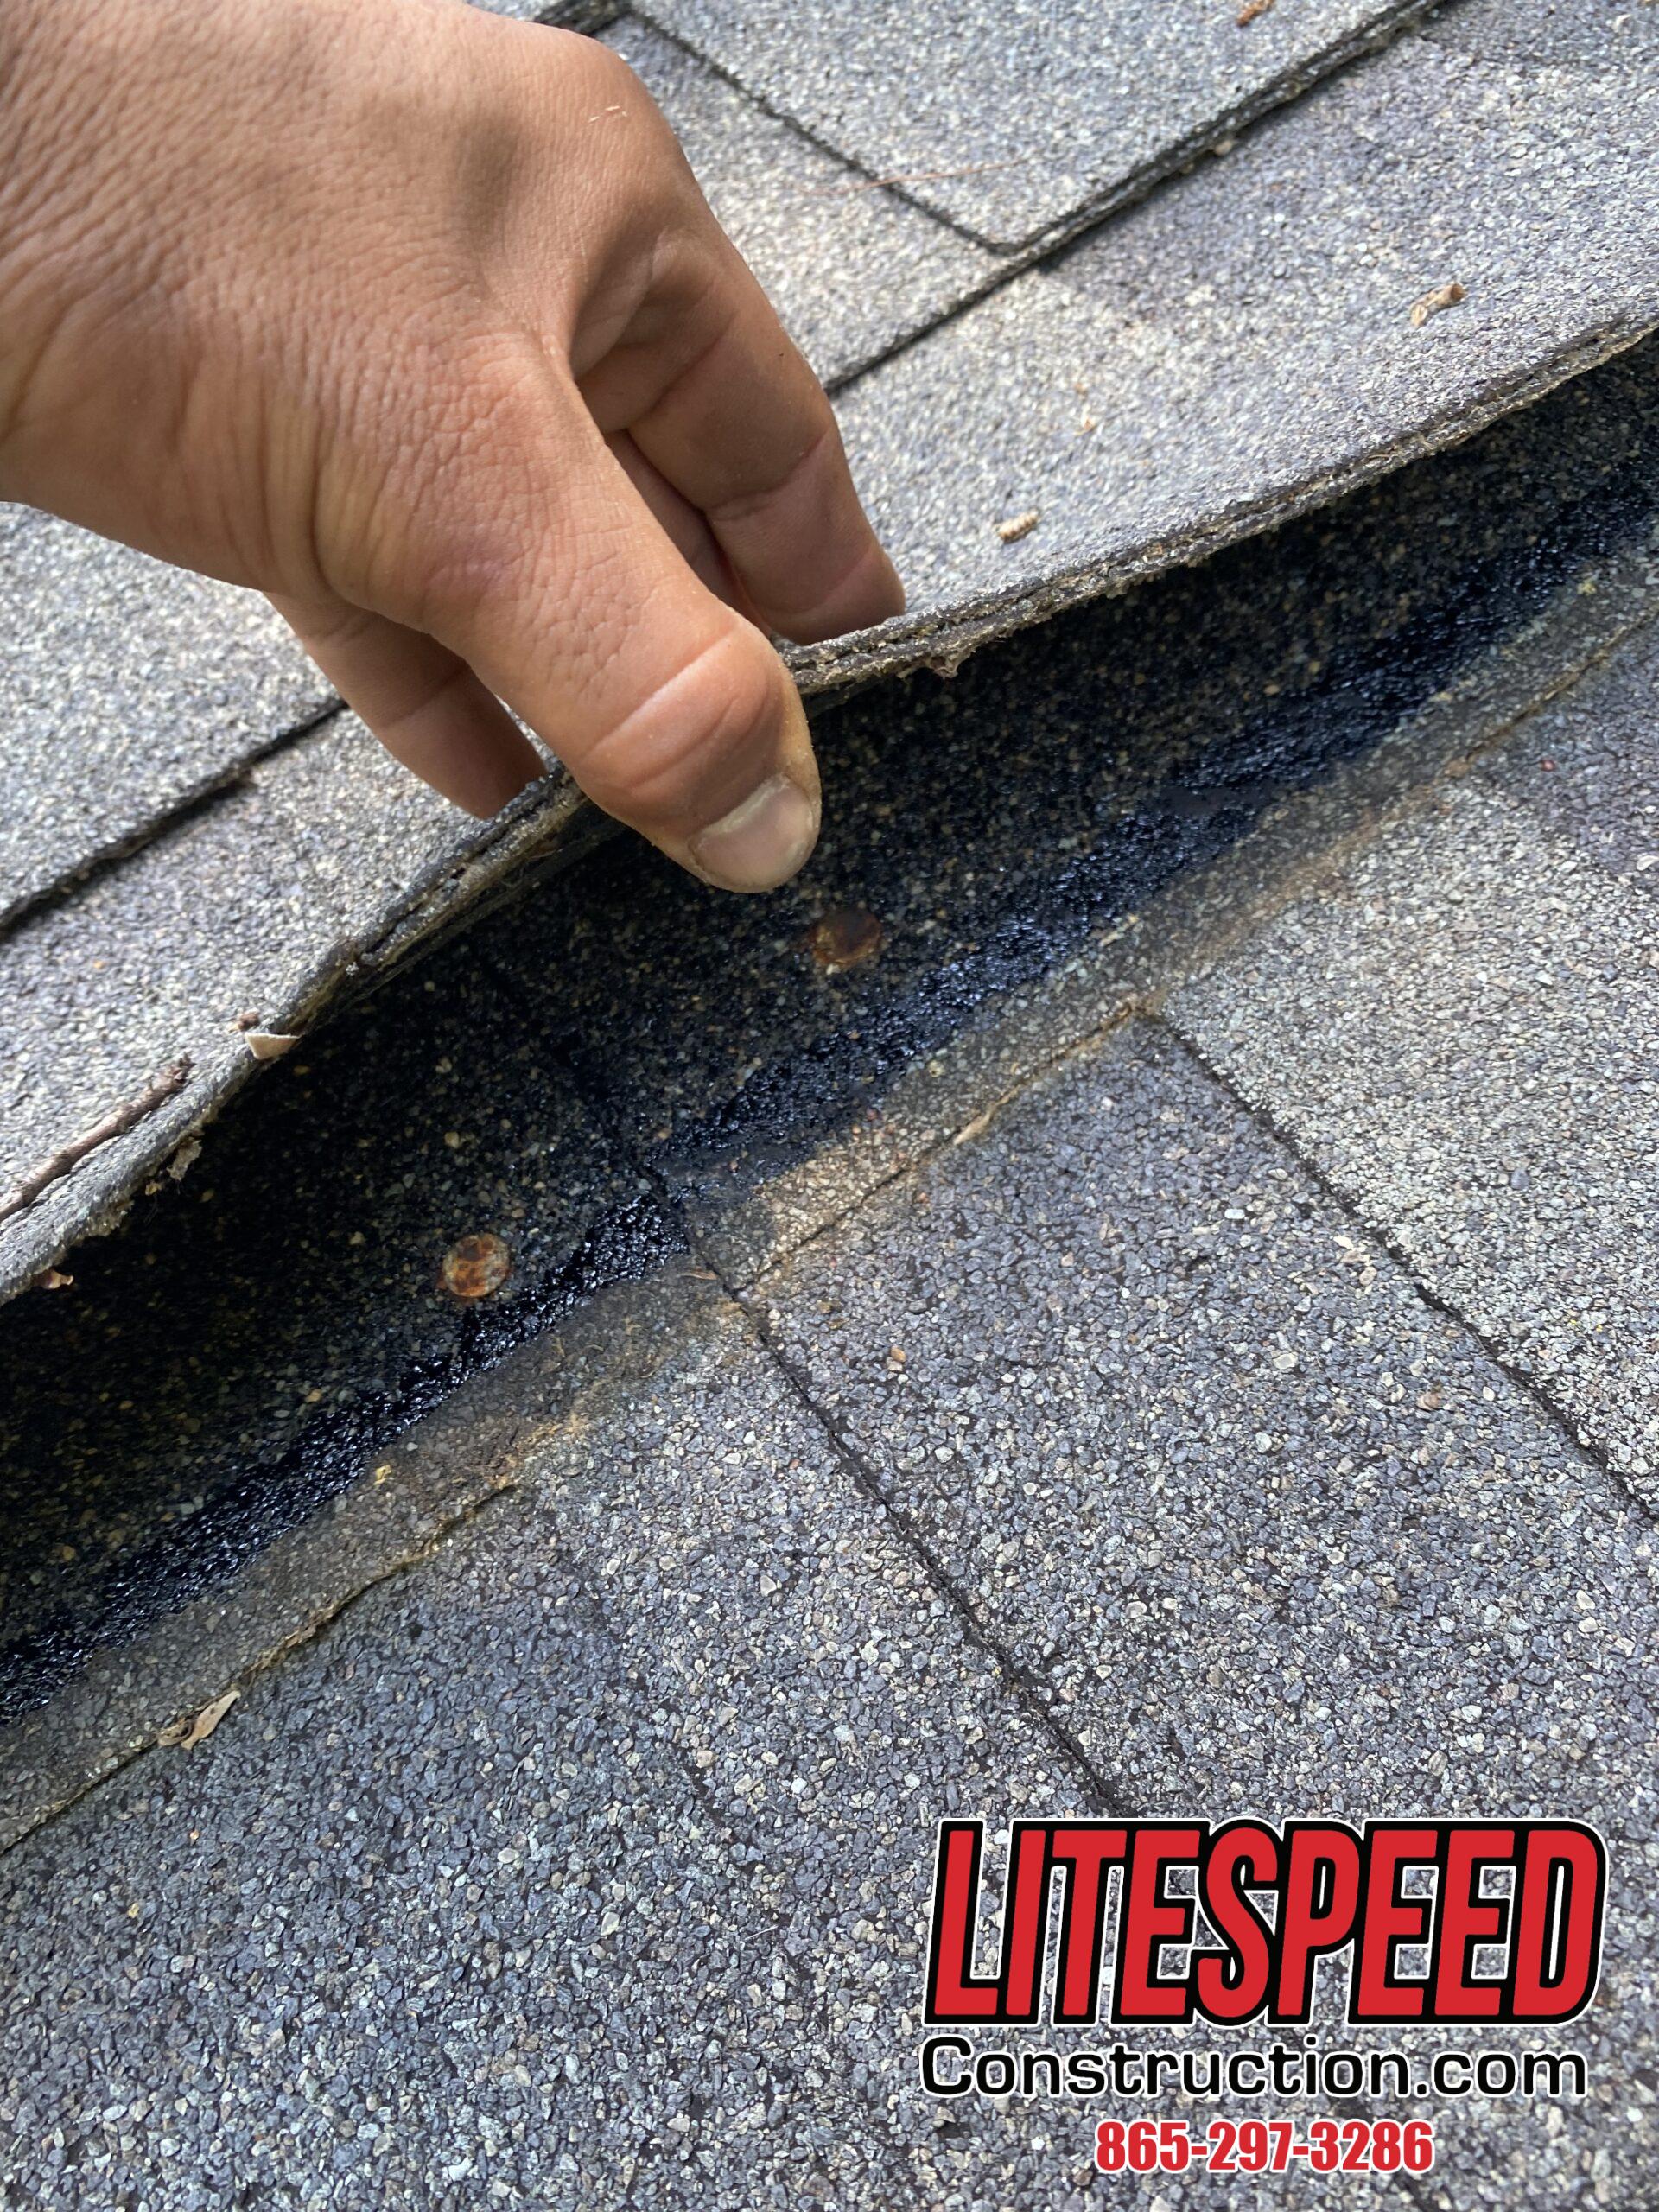 This is a picture of rusty nails underneath the shingles.